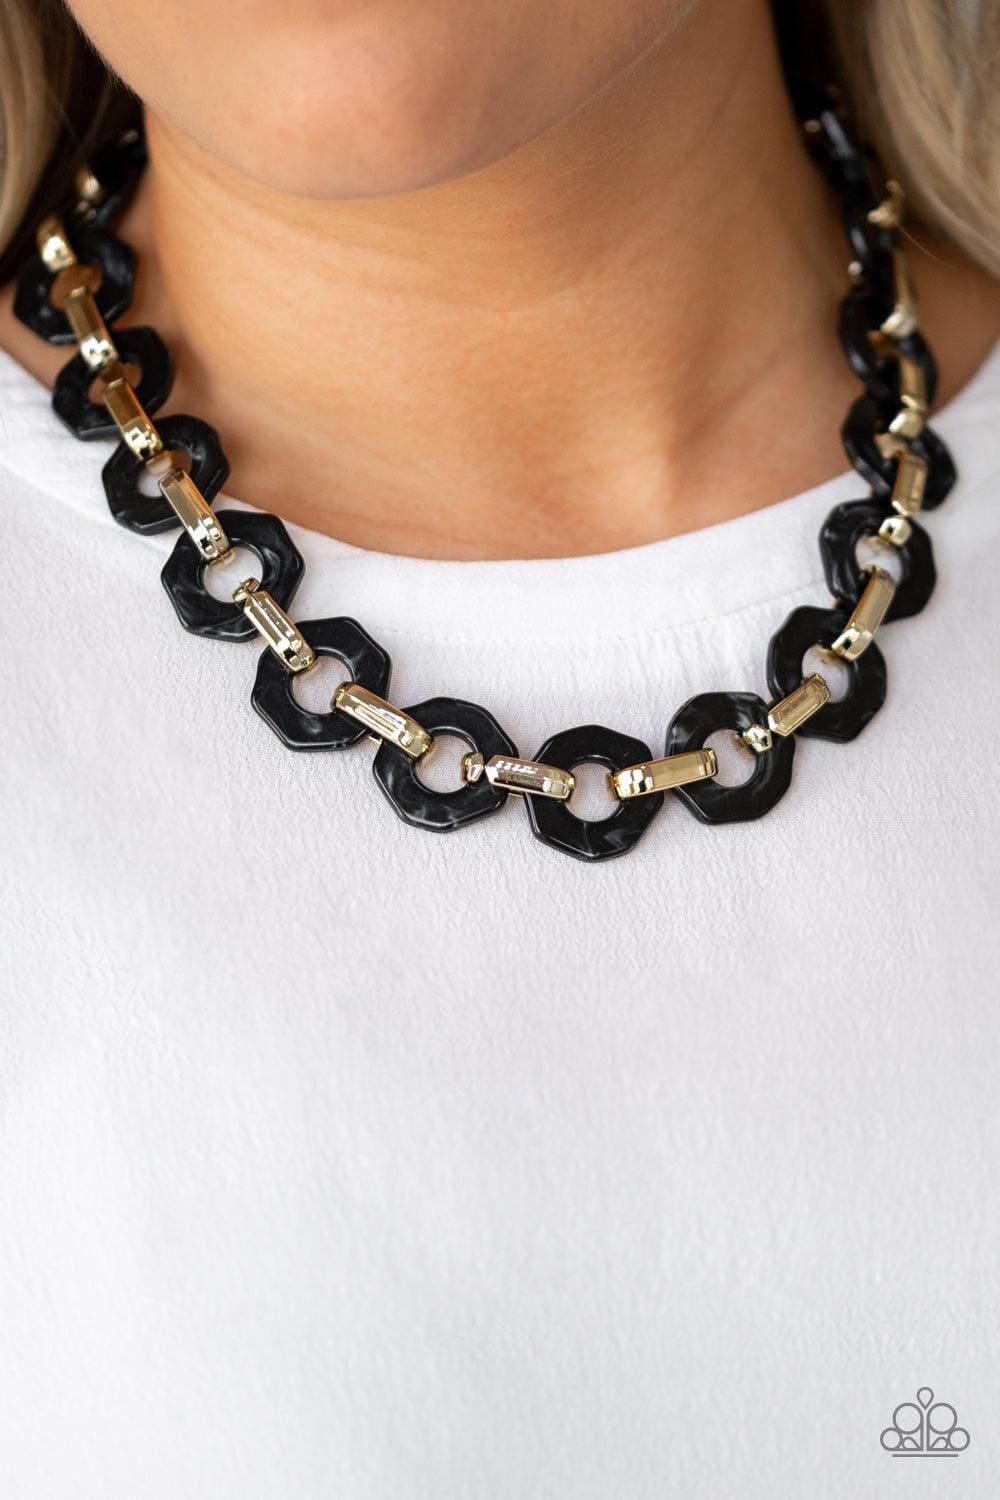 Paparazzi Accessories - Fashionista Fever - Black Necklace - Bling by JessieK